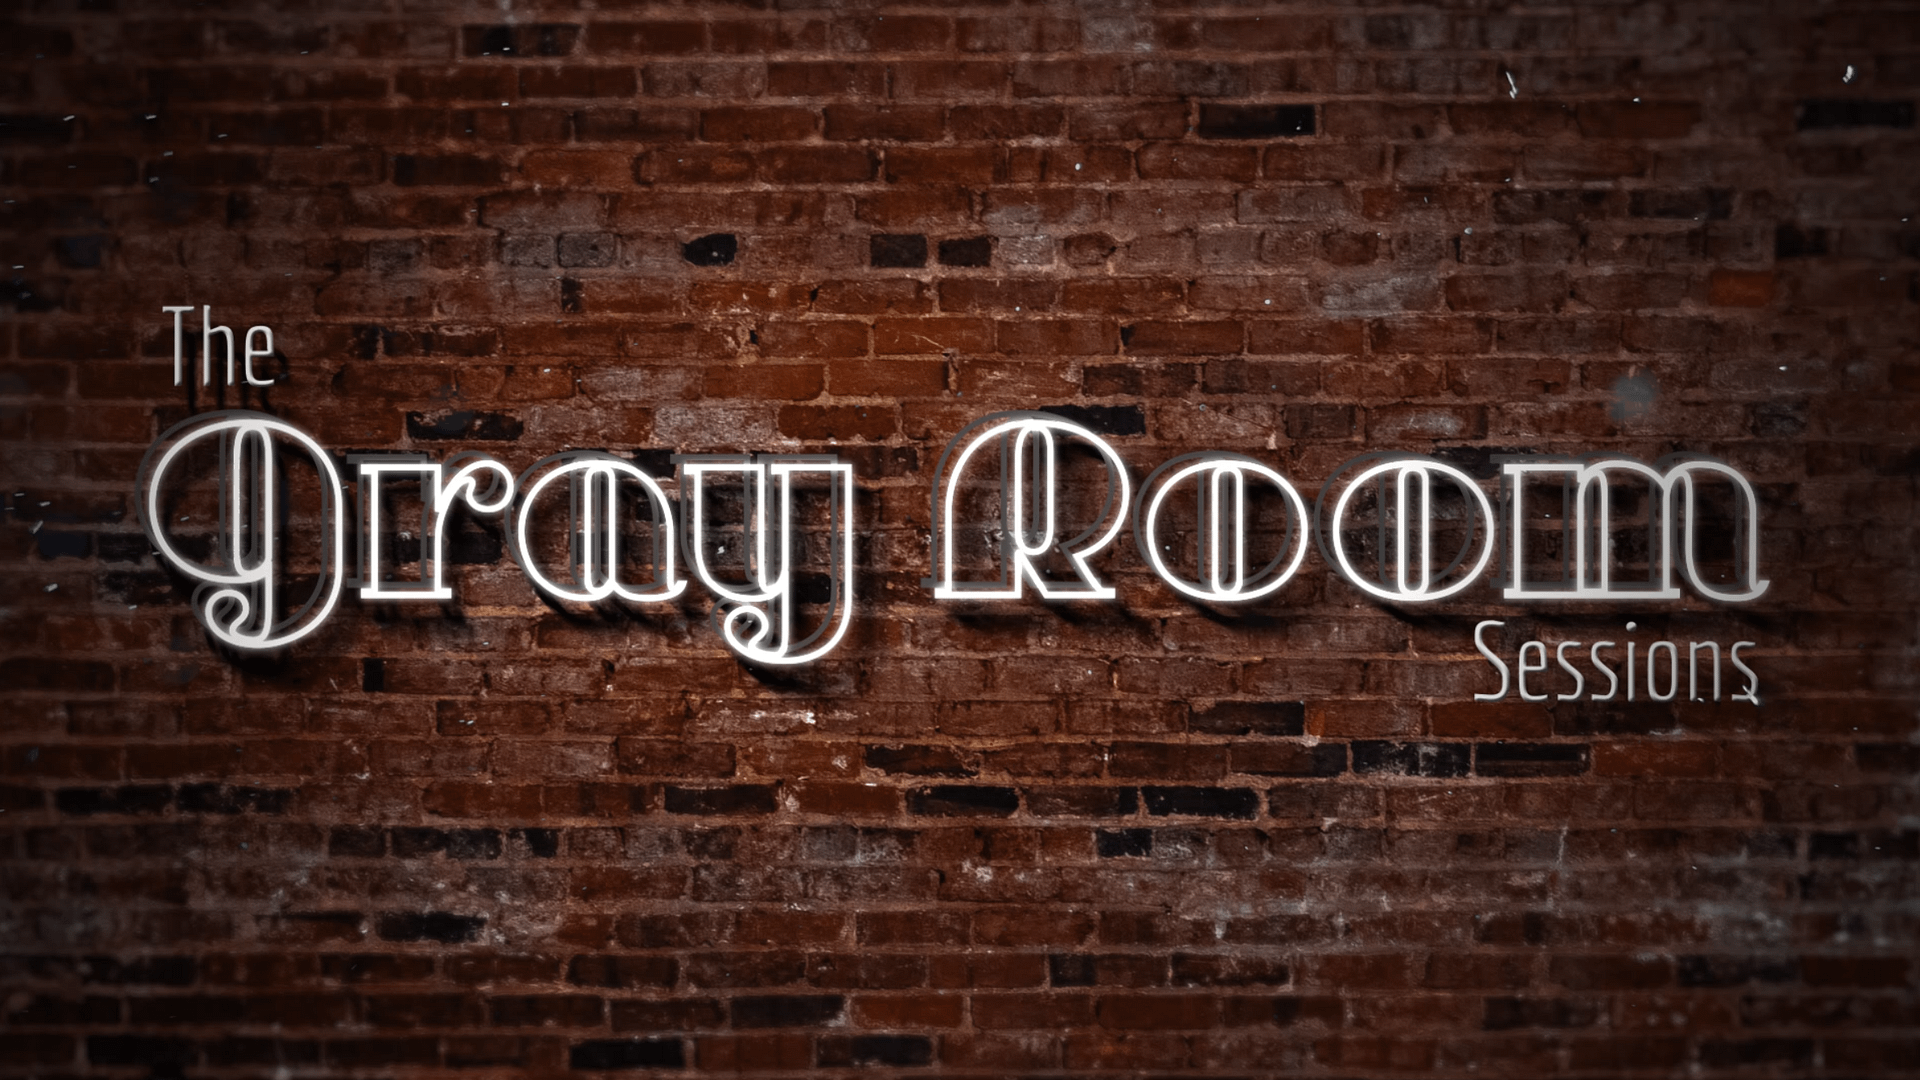 MJS Live Provides Editing for 3+ Seasons of “The Gray Room Sessions”